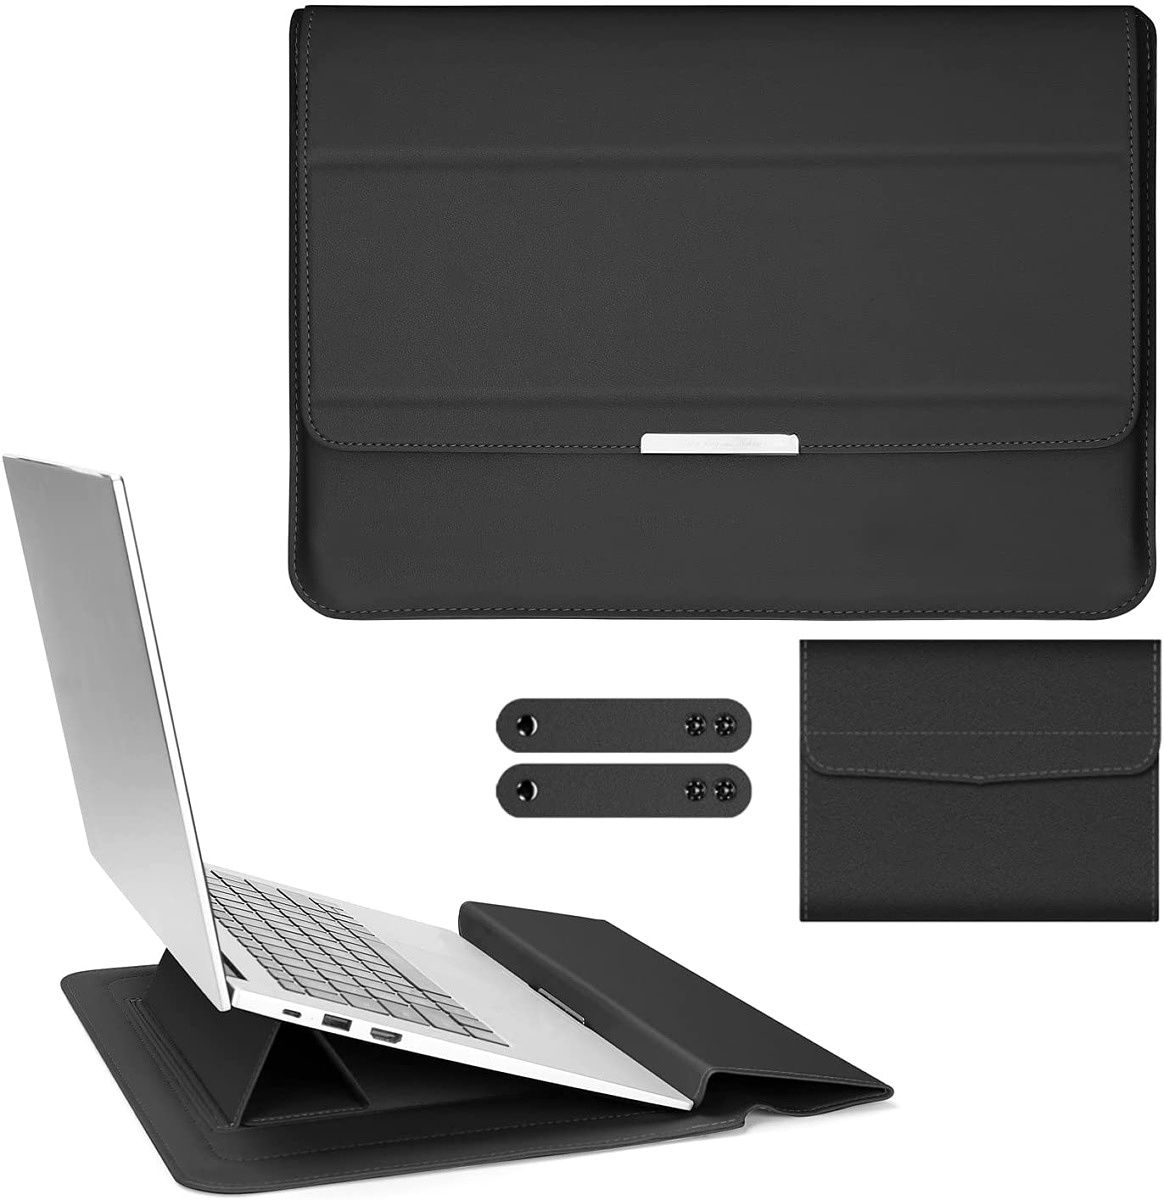 This is a unique laptop sleeve that not only offers protection, but also features a built-in stand that can elevate the laptop for better airflow and offer a better angle for typing on the keyboard.